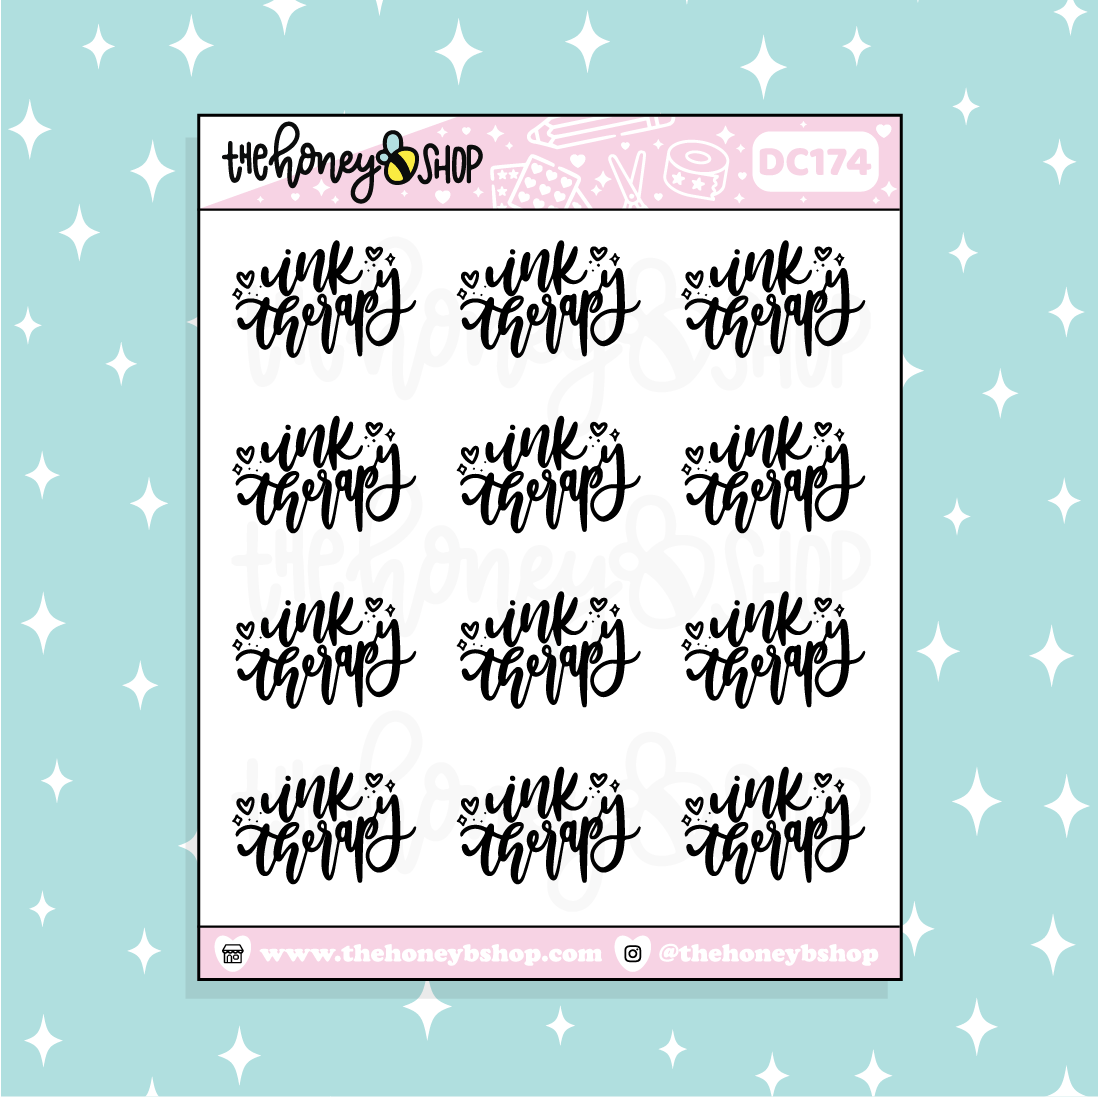 Ink Therapy (Tattoo) Doodle Planner Sticker